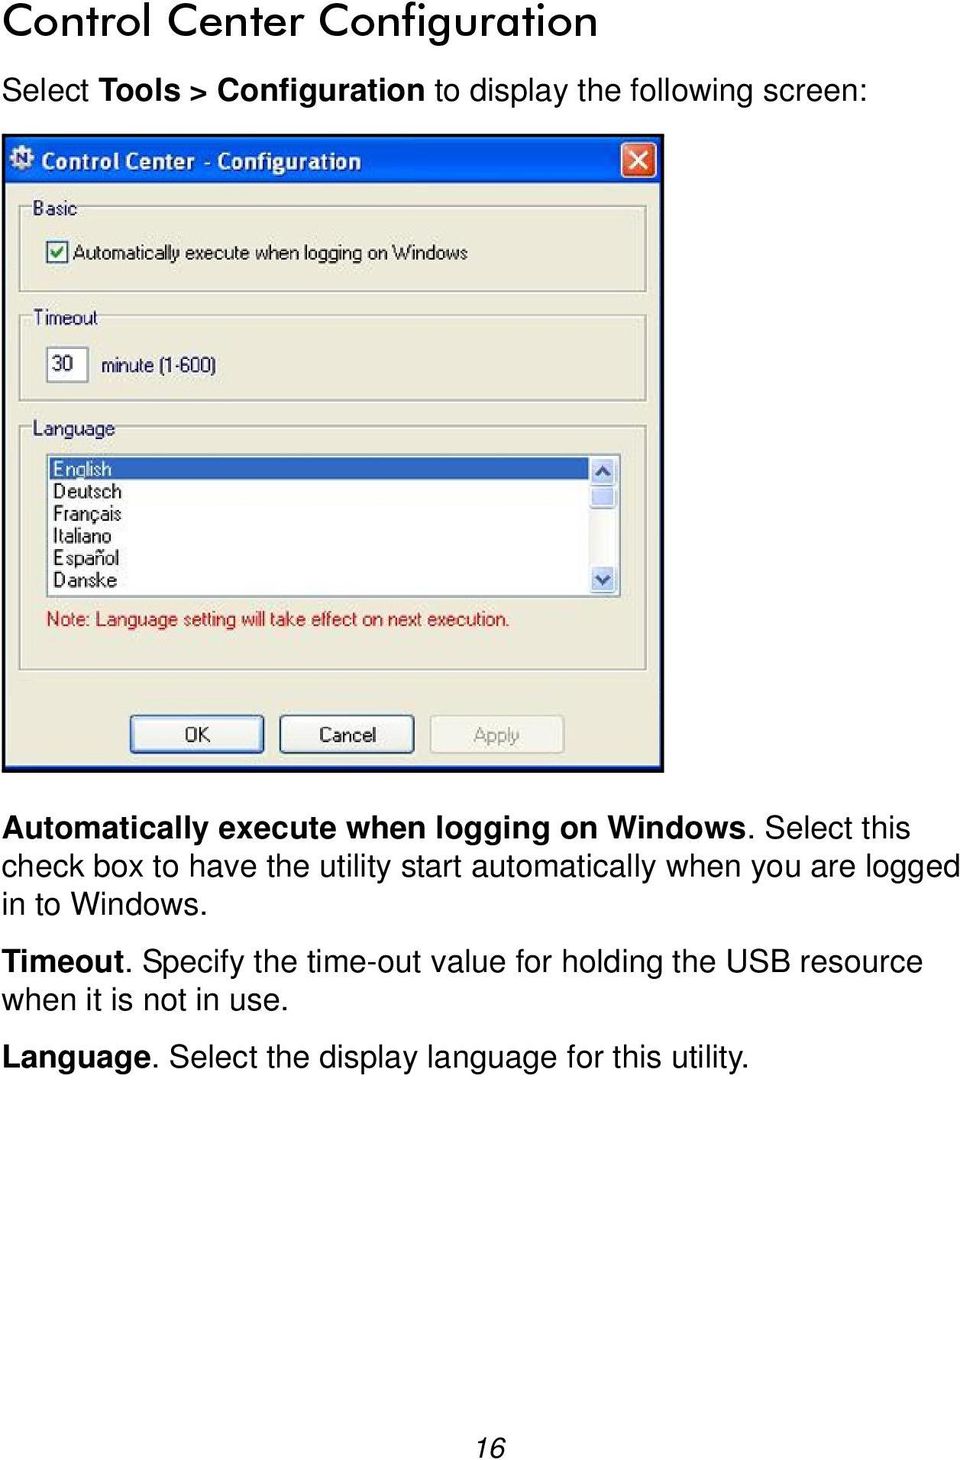 Select this check box to have the utility start automatically when you are logged in to Windows.